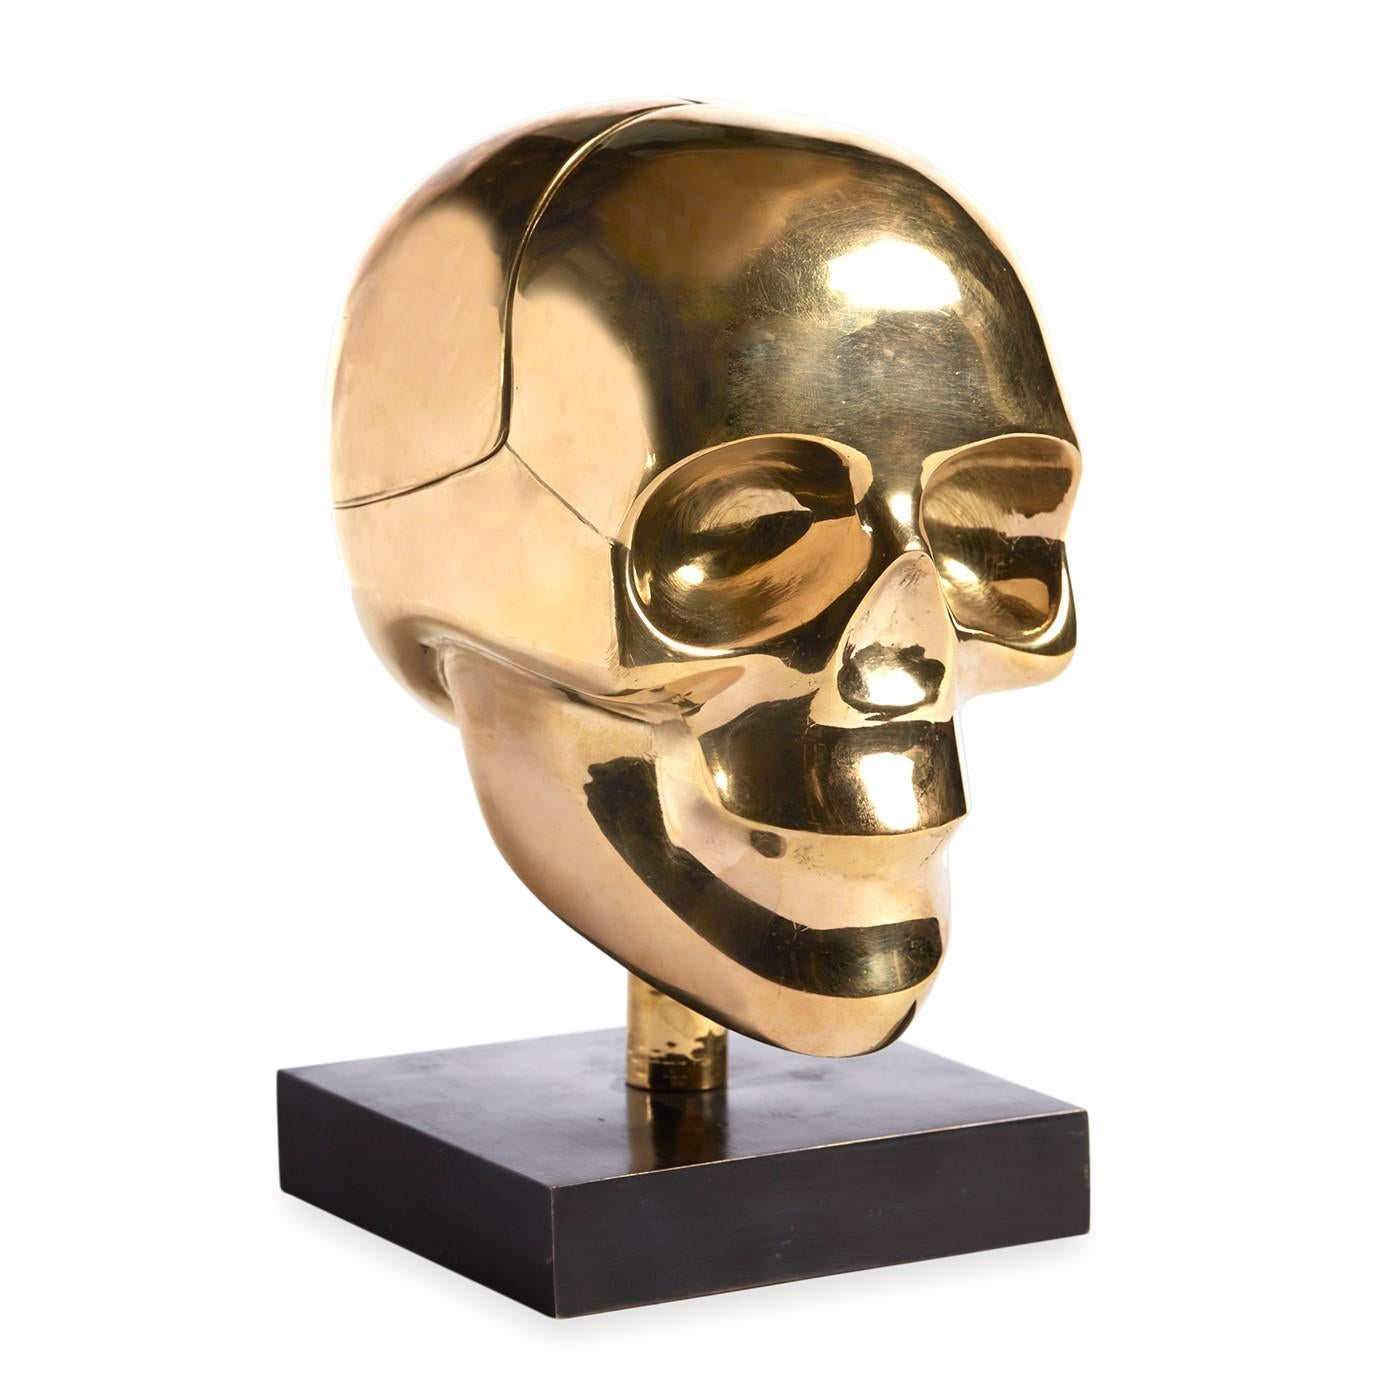 Curatorial Cranium. You might just lose your head over our skull box. Our stylized, Minimalist take on Hamlet's bestie has a hidden hinge at the back, revealing a sneaky spot for storing bits and bobs. Complete with a blackened brass base, it'll add